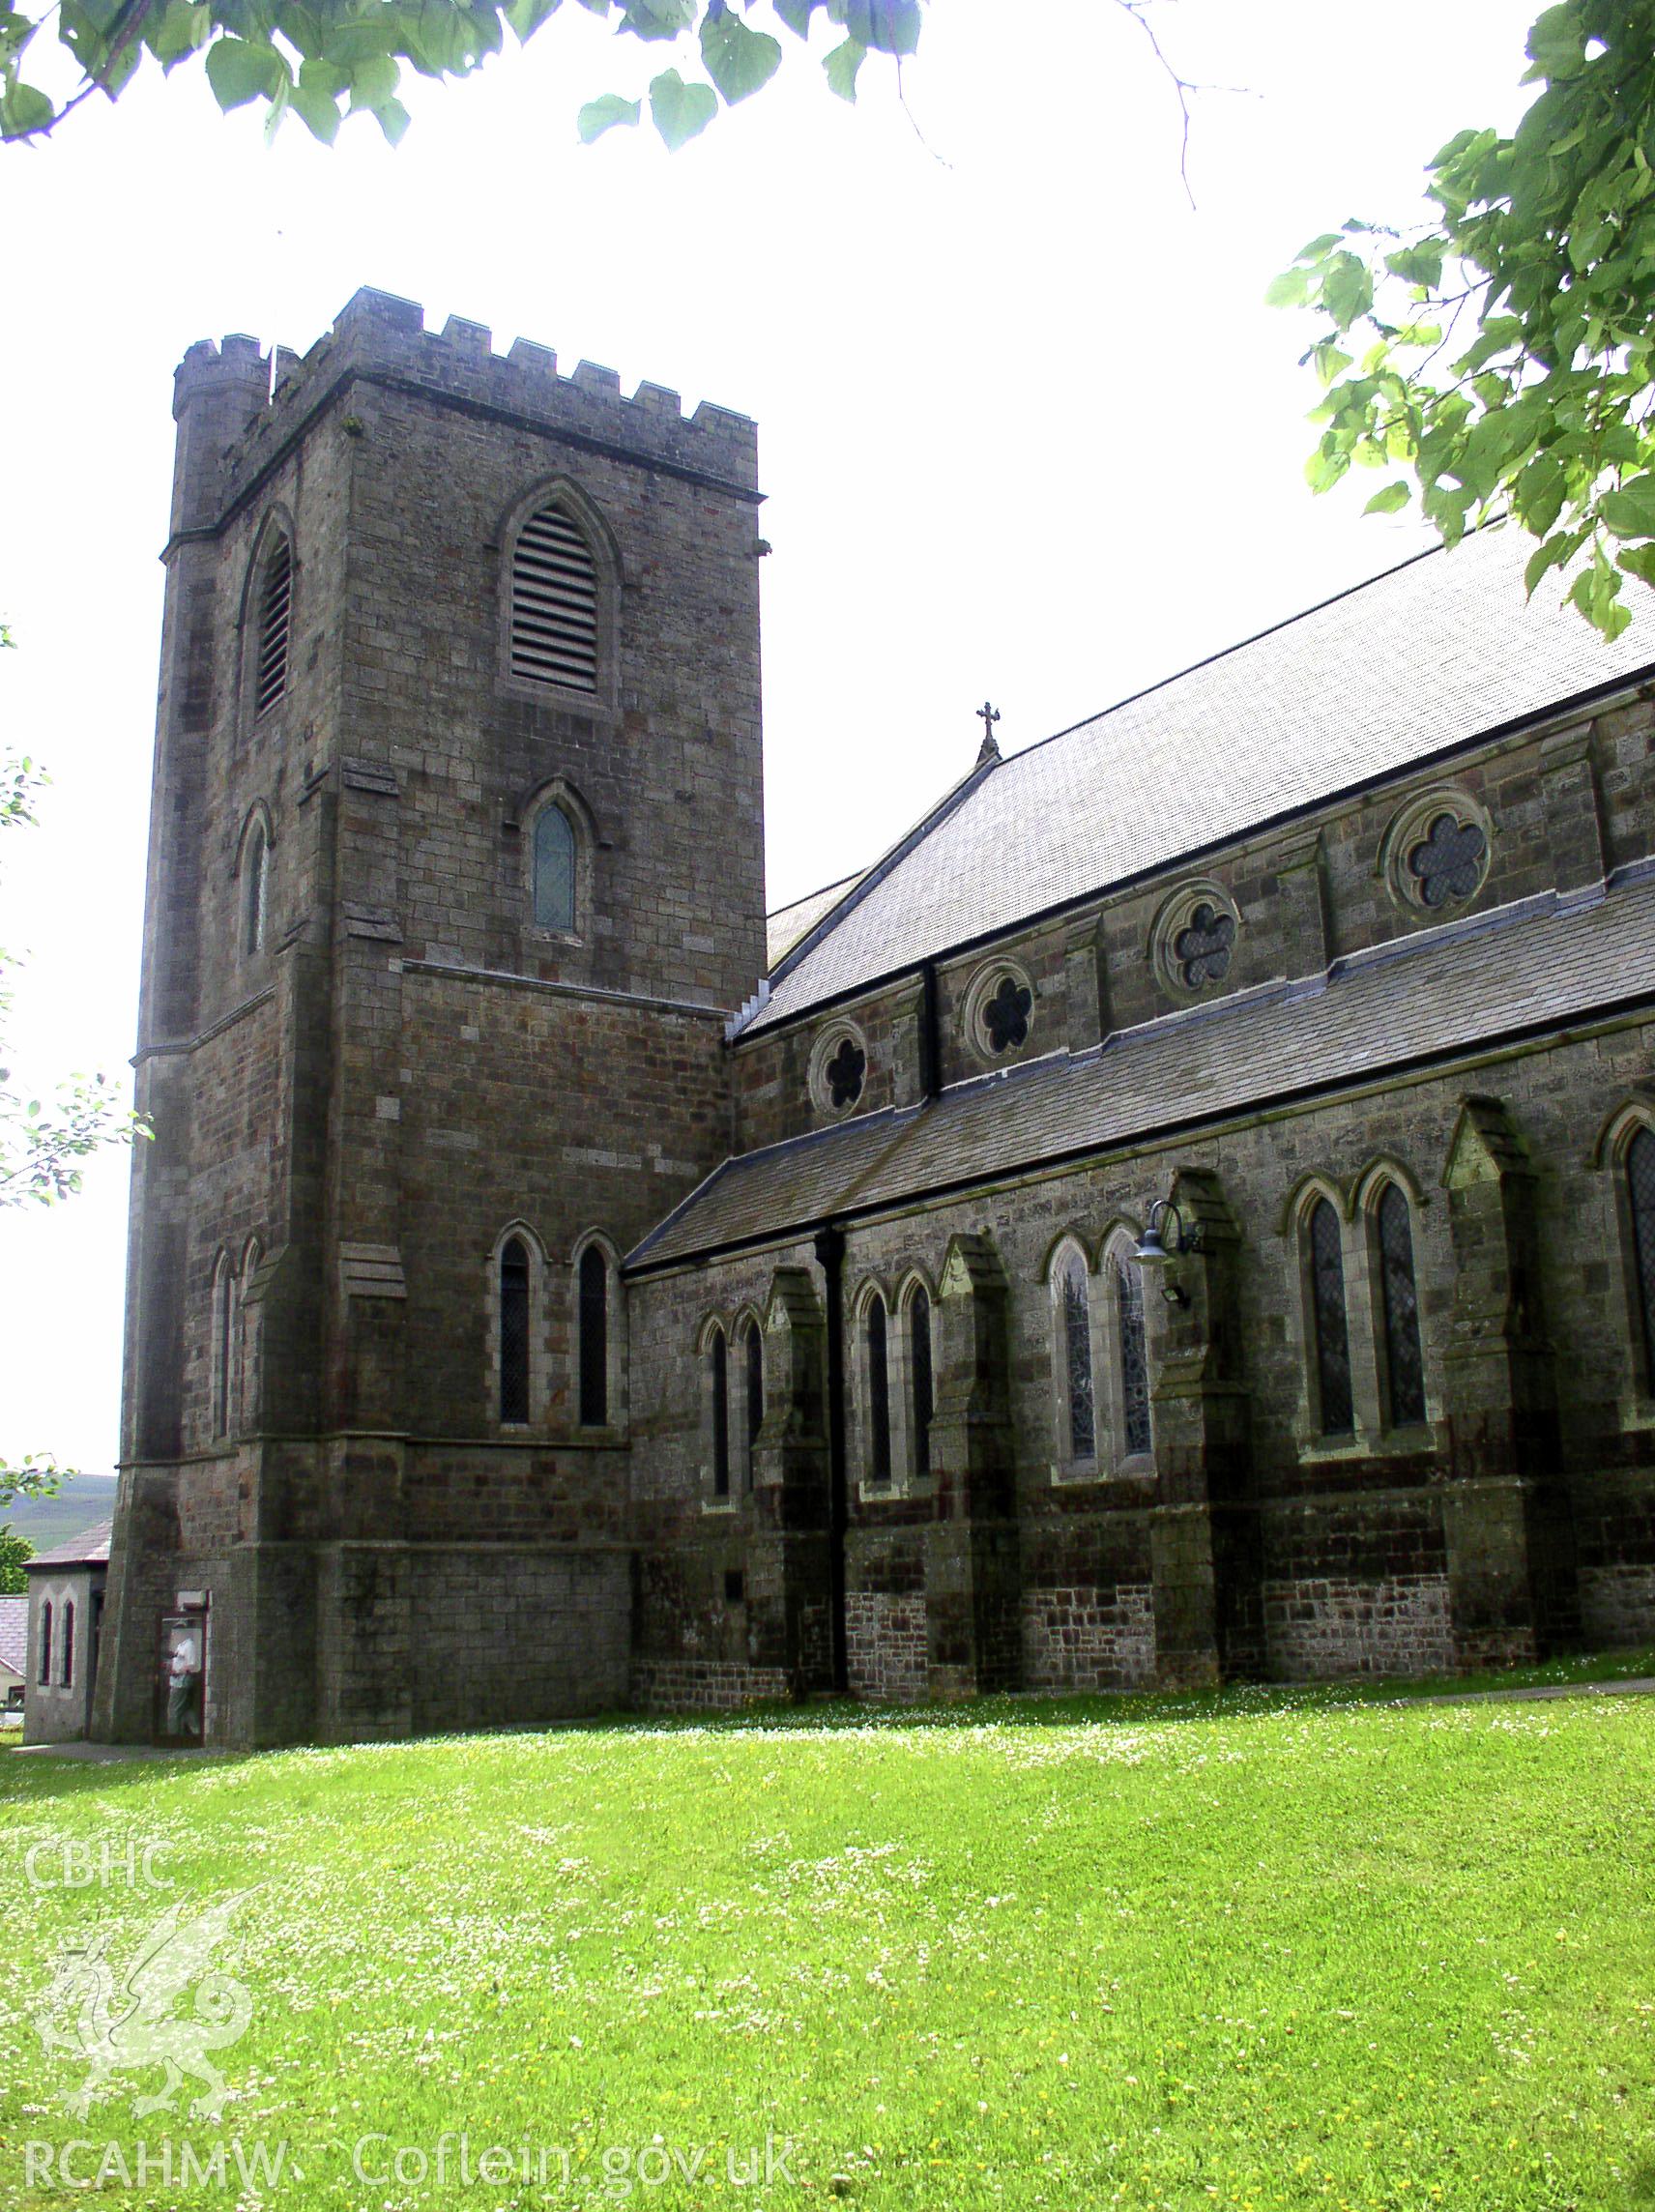 Colour digital photograph showing the exterior of St Michael and All Angel's Church, Maesteg; Glamorgan.